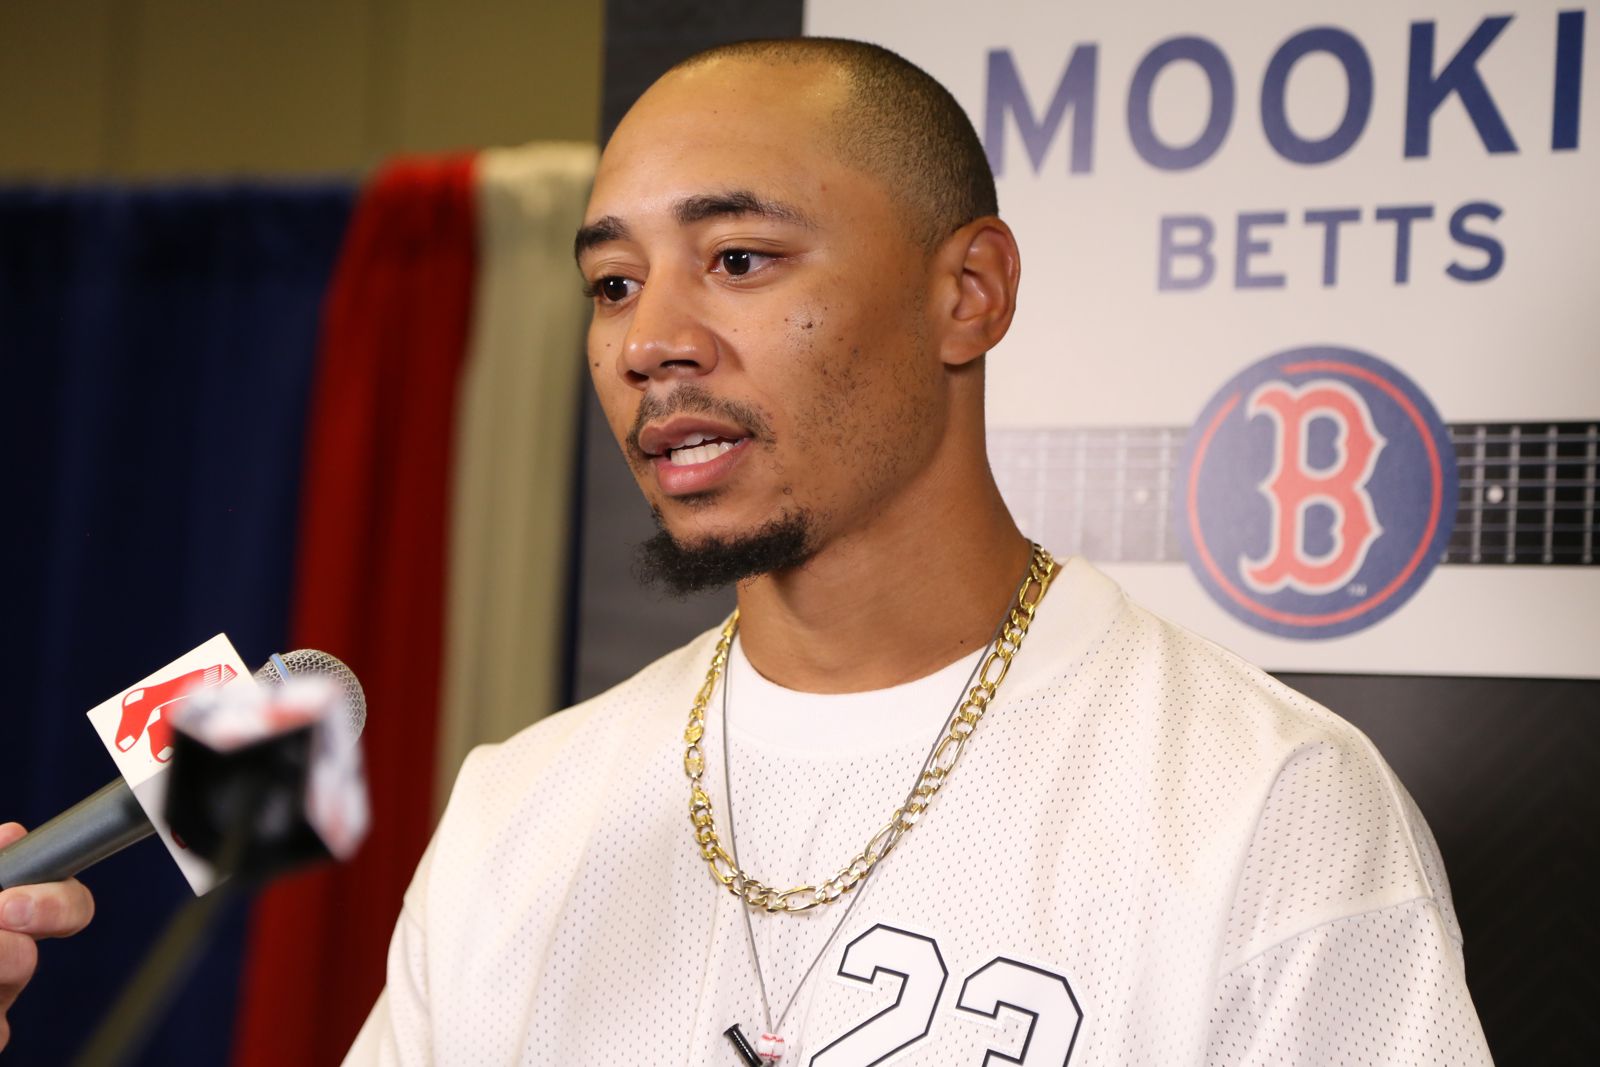 Mookie Betts 'up there' among best dressed on All-Star red carpet